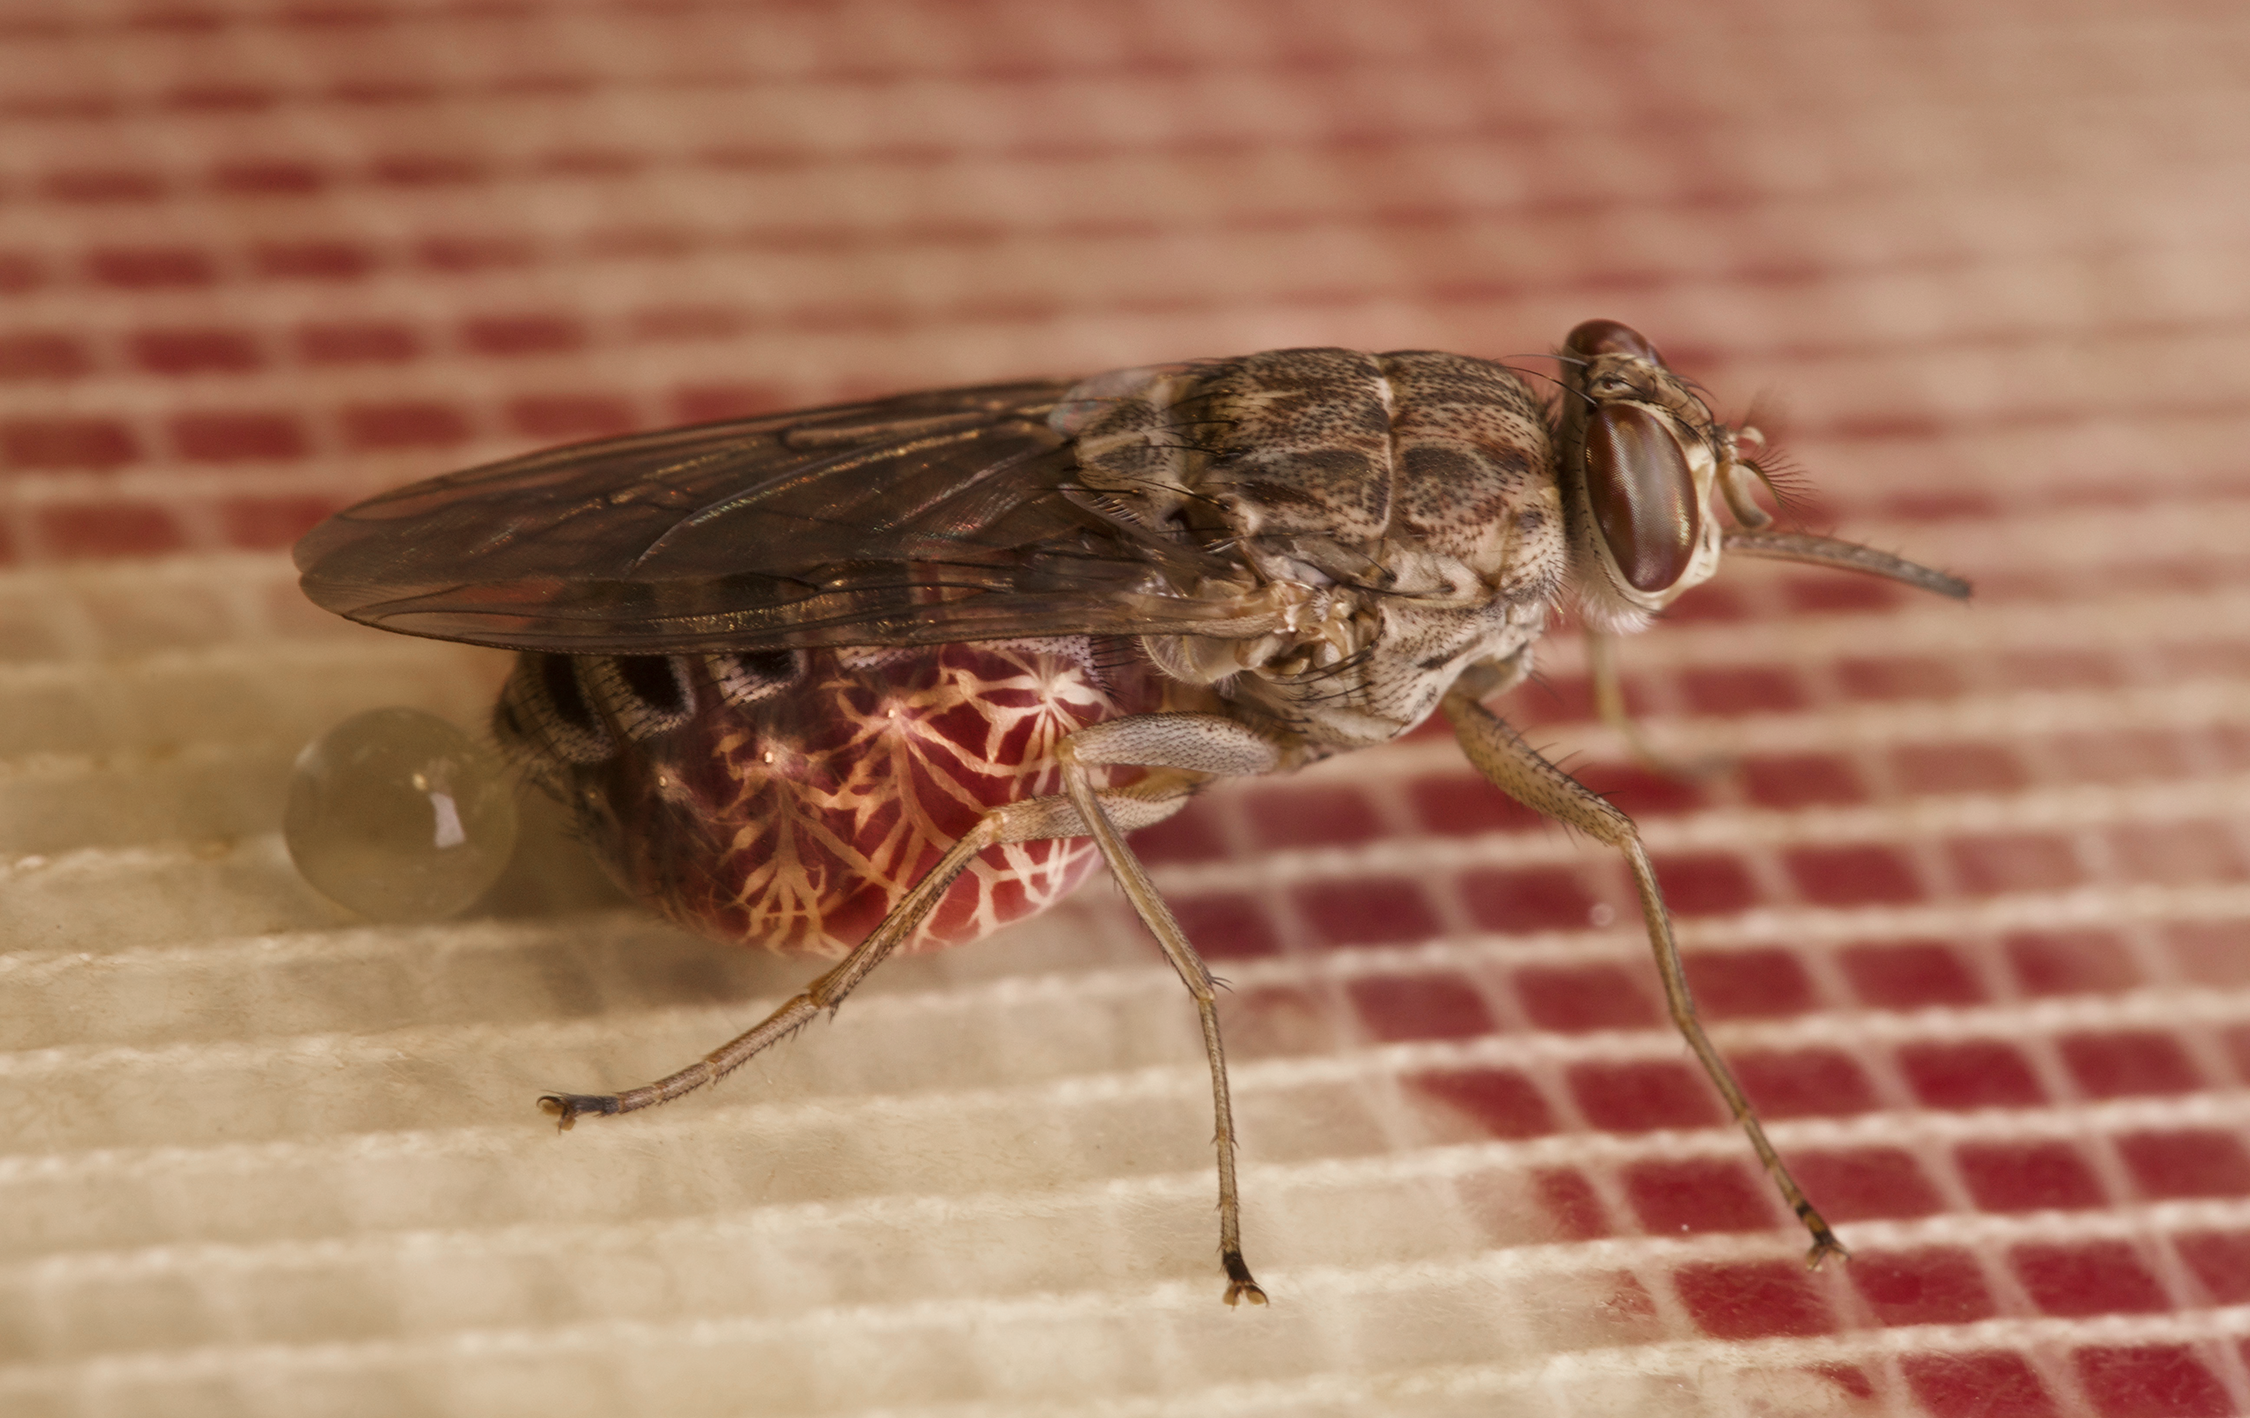 Reimagining control of the Tsetse fly, Science News